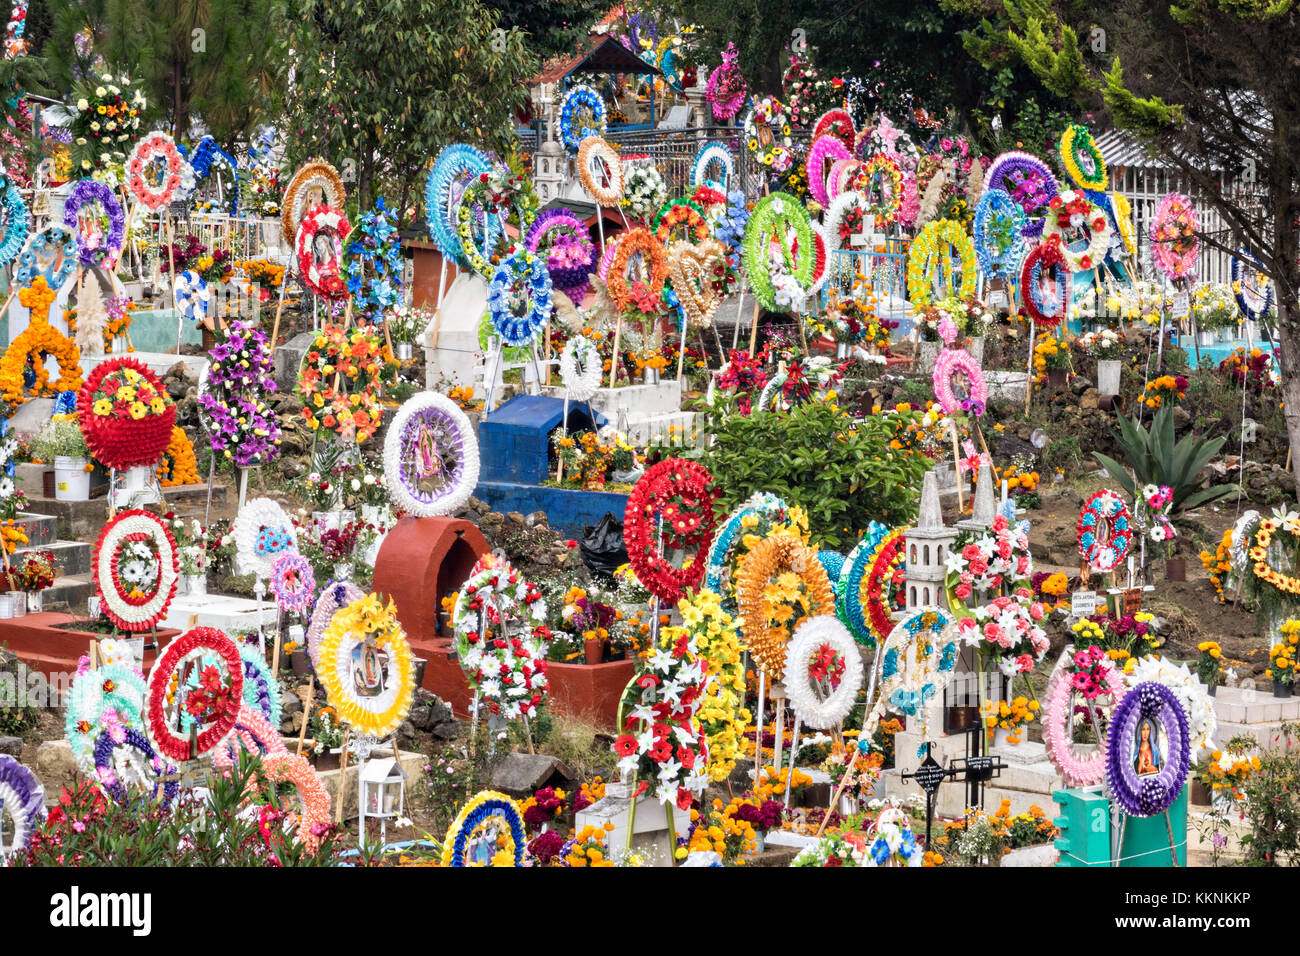 Hundreds of hillside graves decorated with flowers and wreaths for the Day of the Dead festival November 3, 2017 in Nuevo San Juan Parangaricutiro, Michoacan, Mexico. Stock Photo